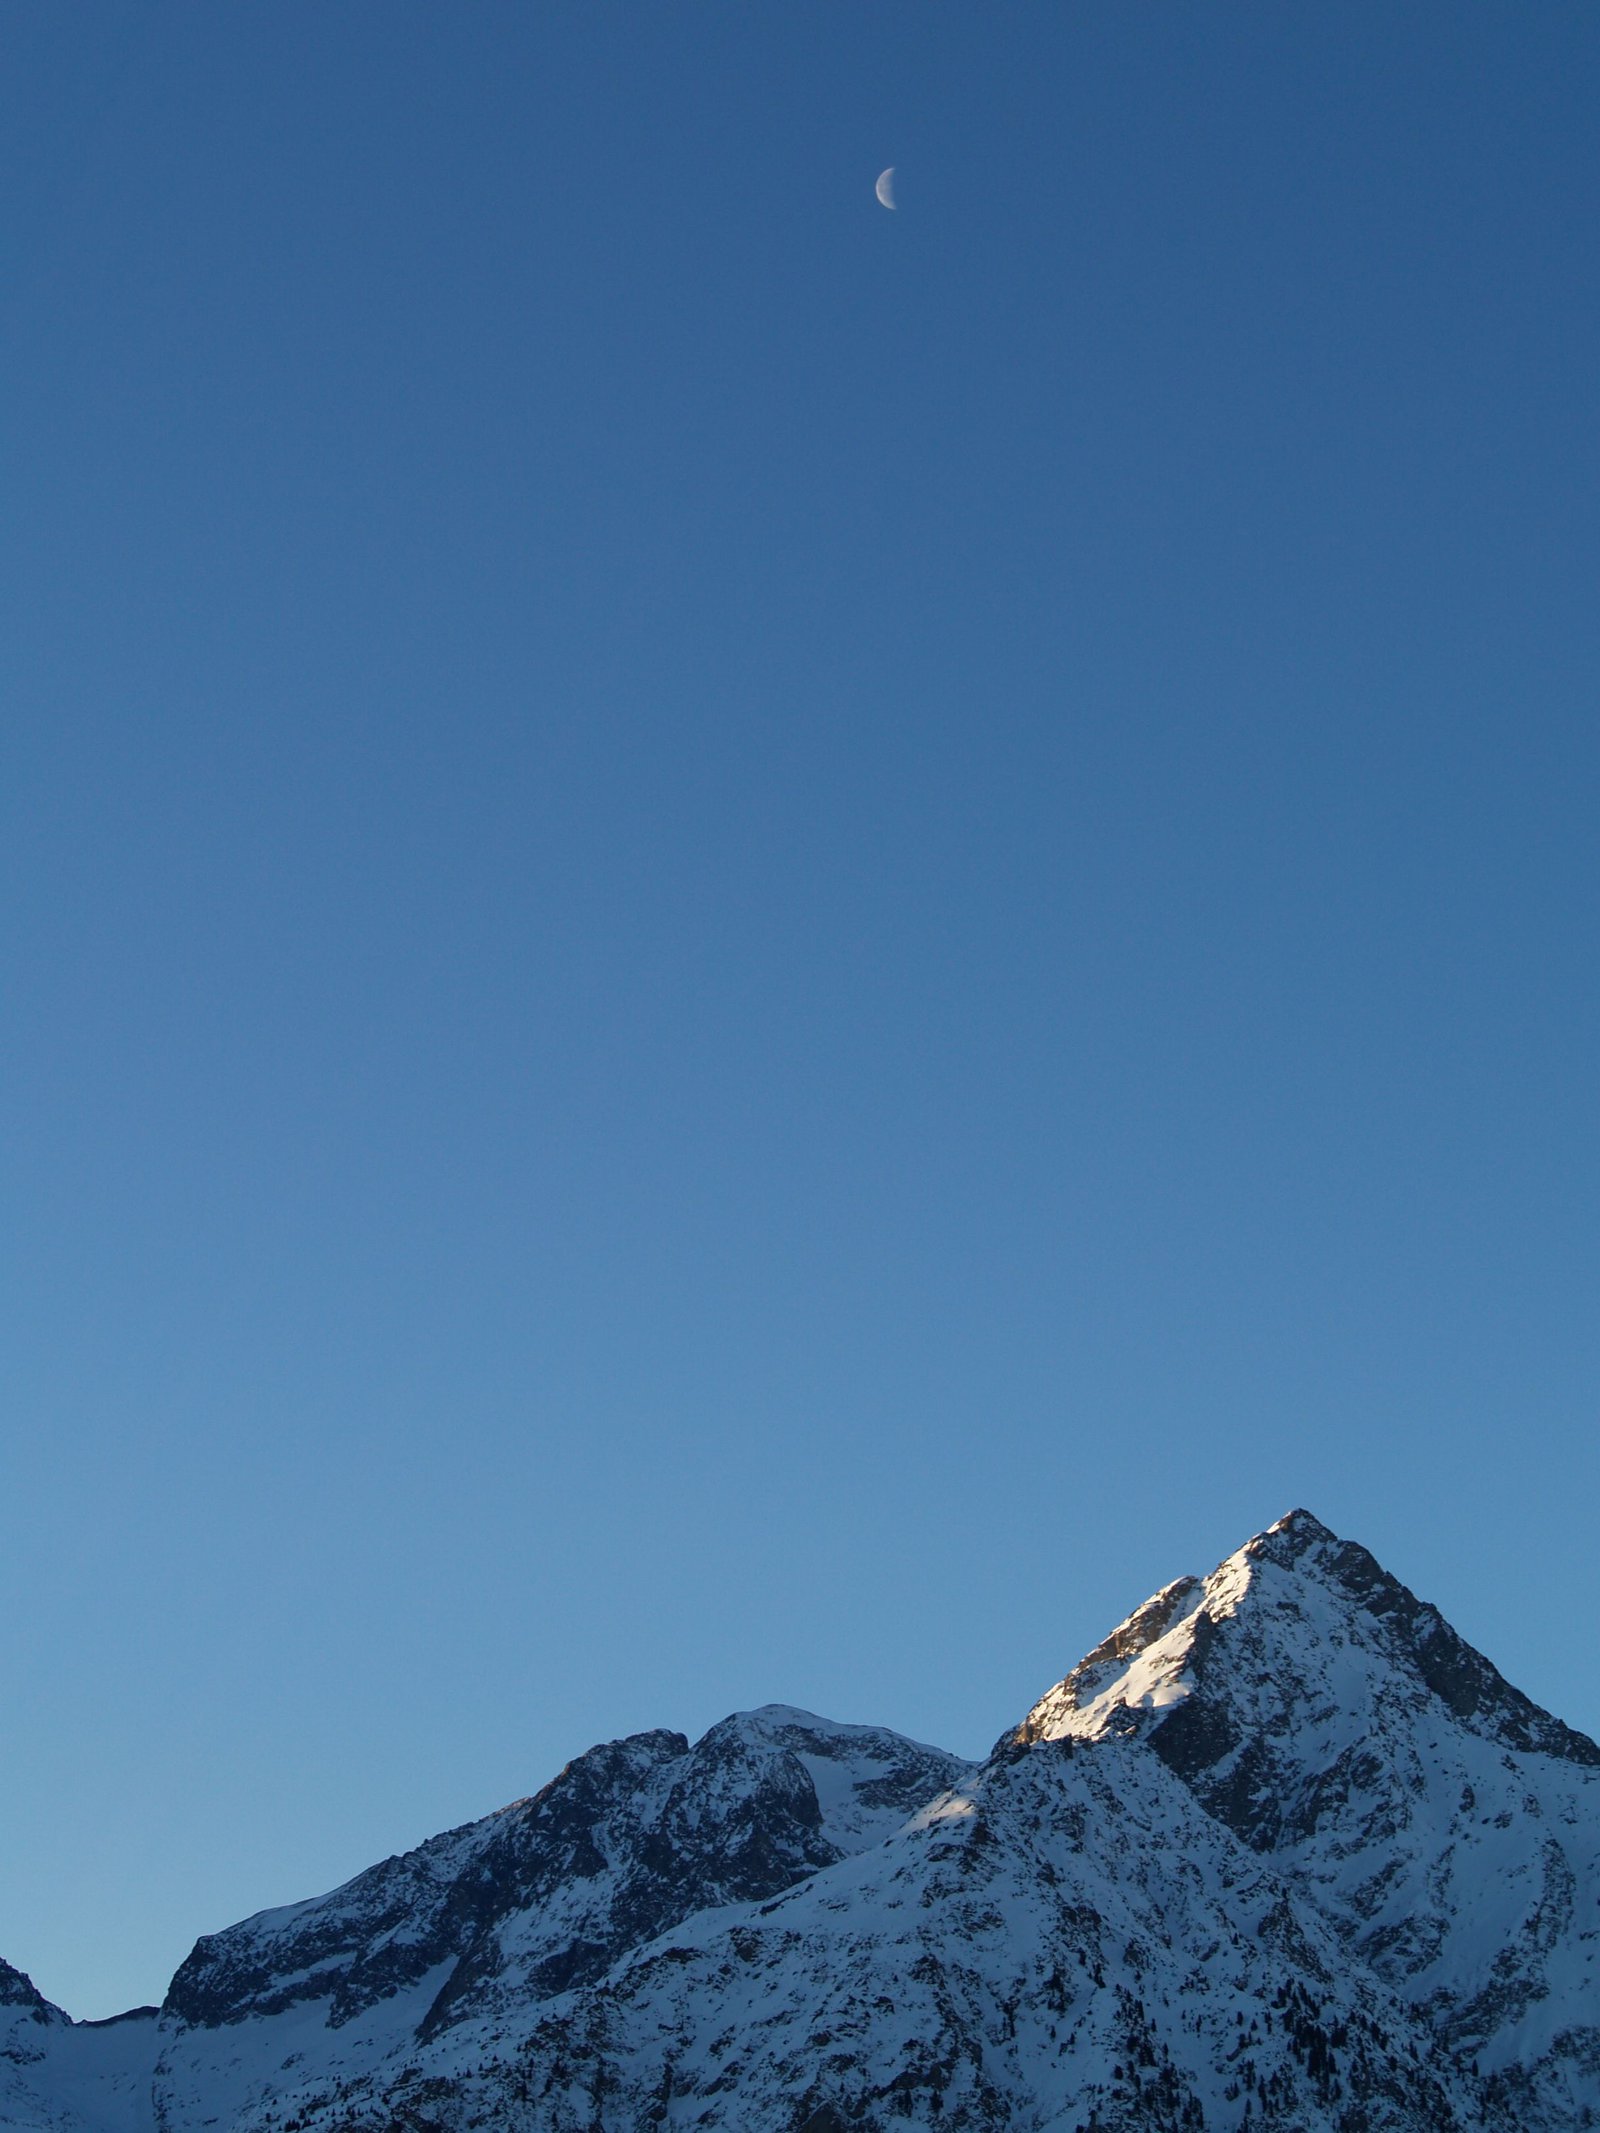 Les Deux Alpes and the Moon